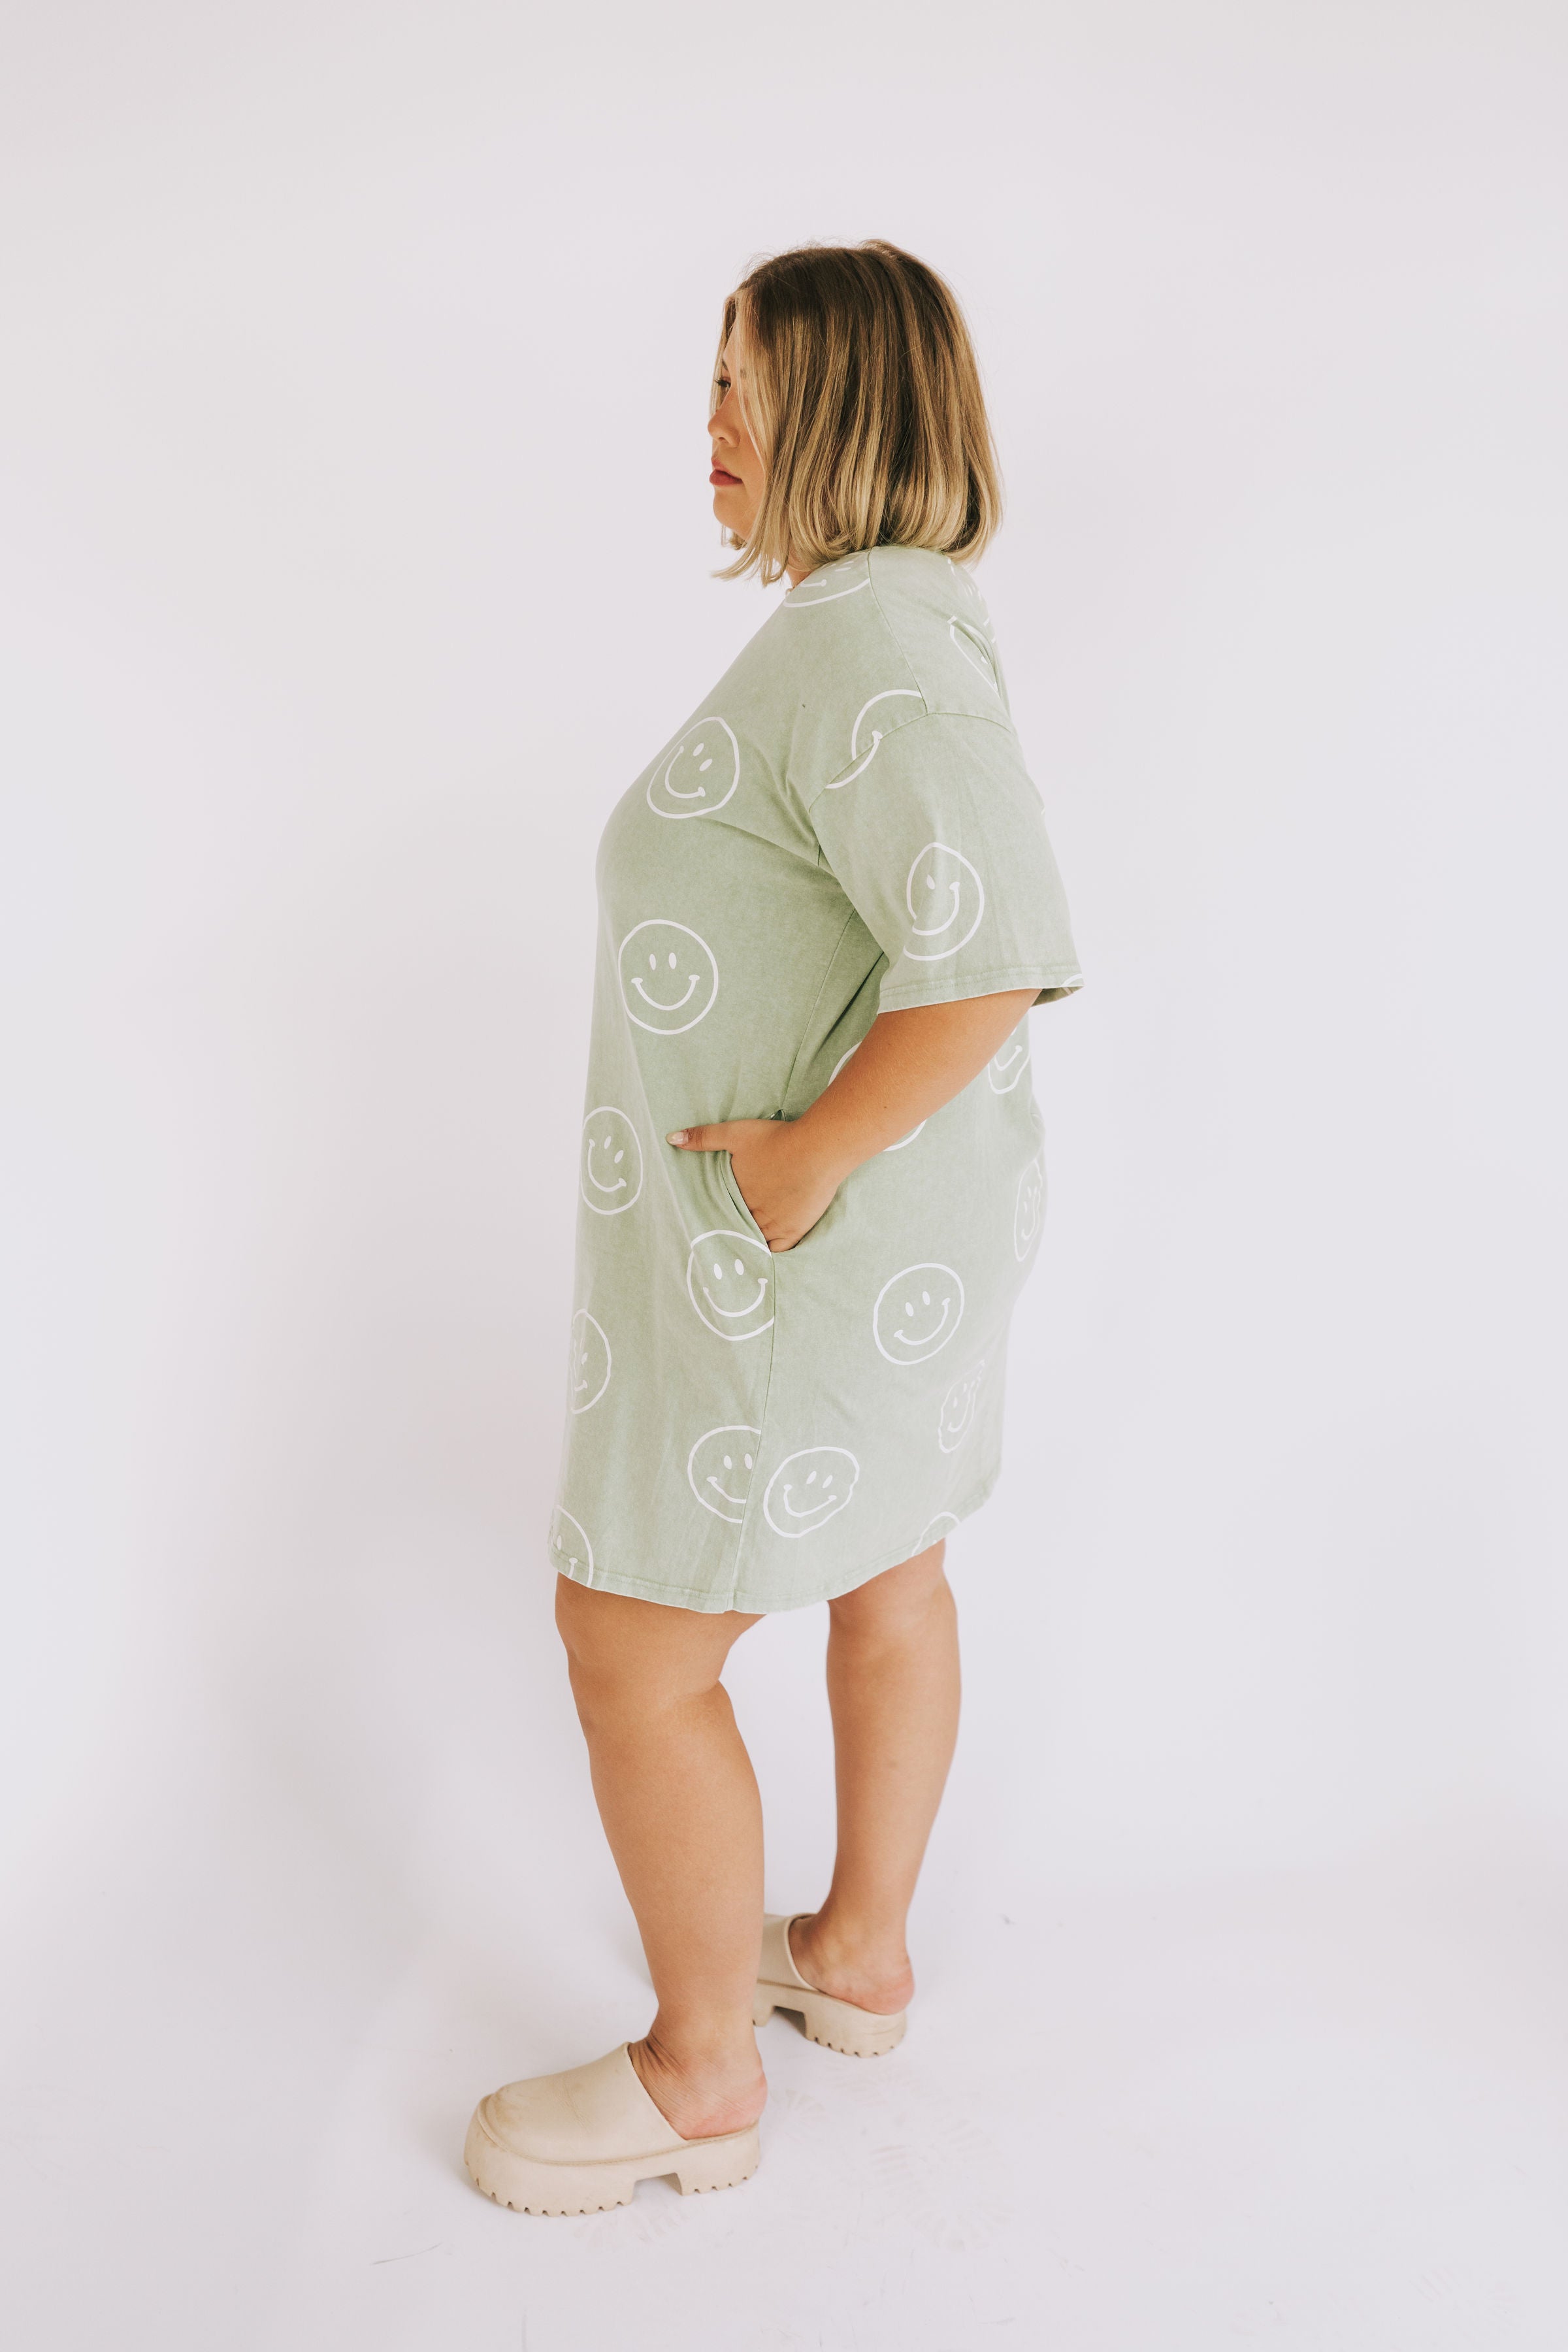 PLUS SIZE - Smile Says It All Dress - New Color!